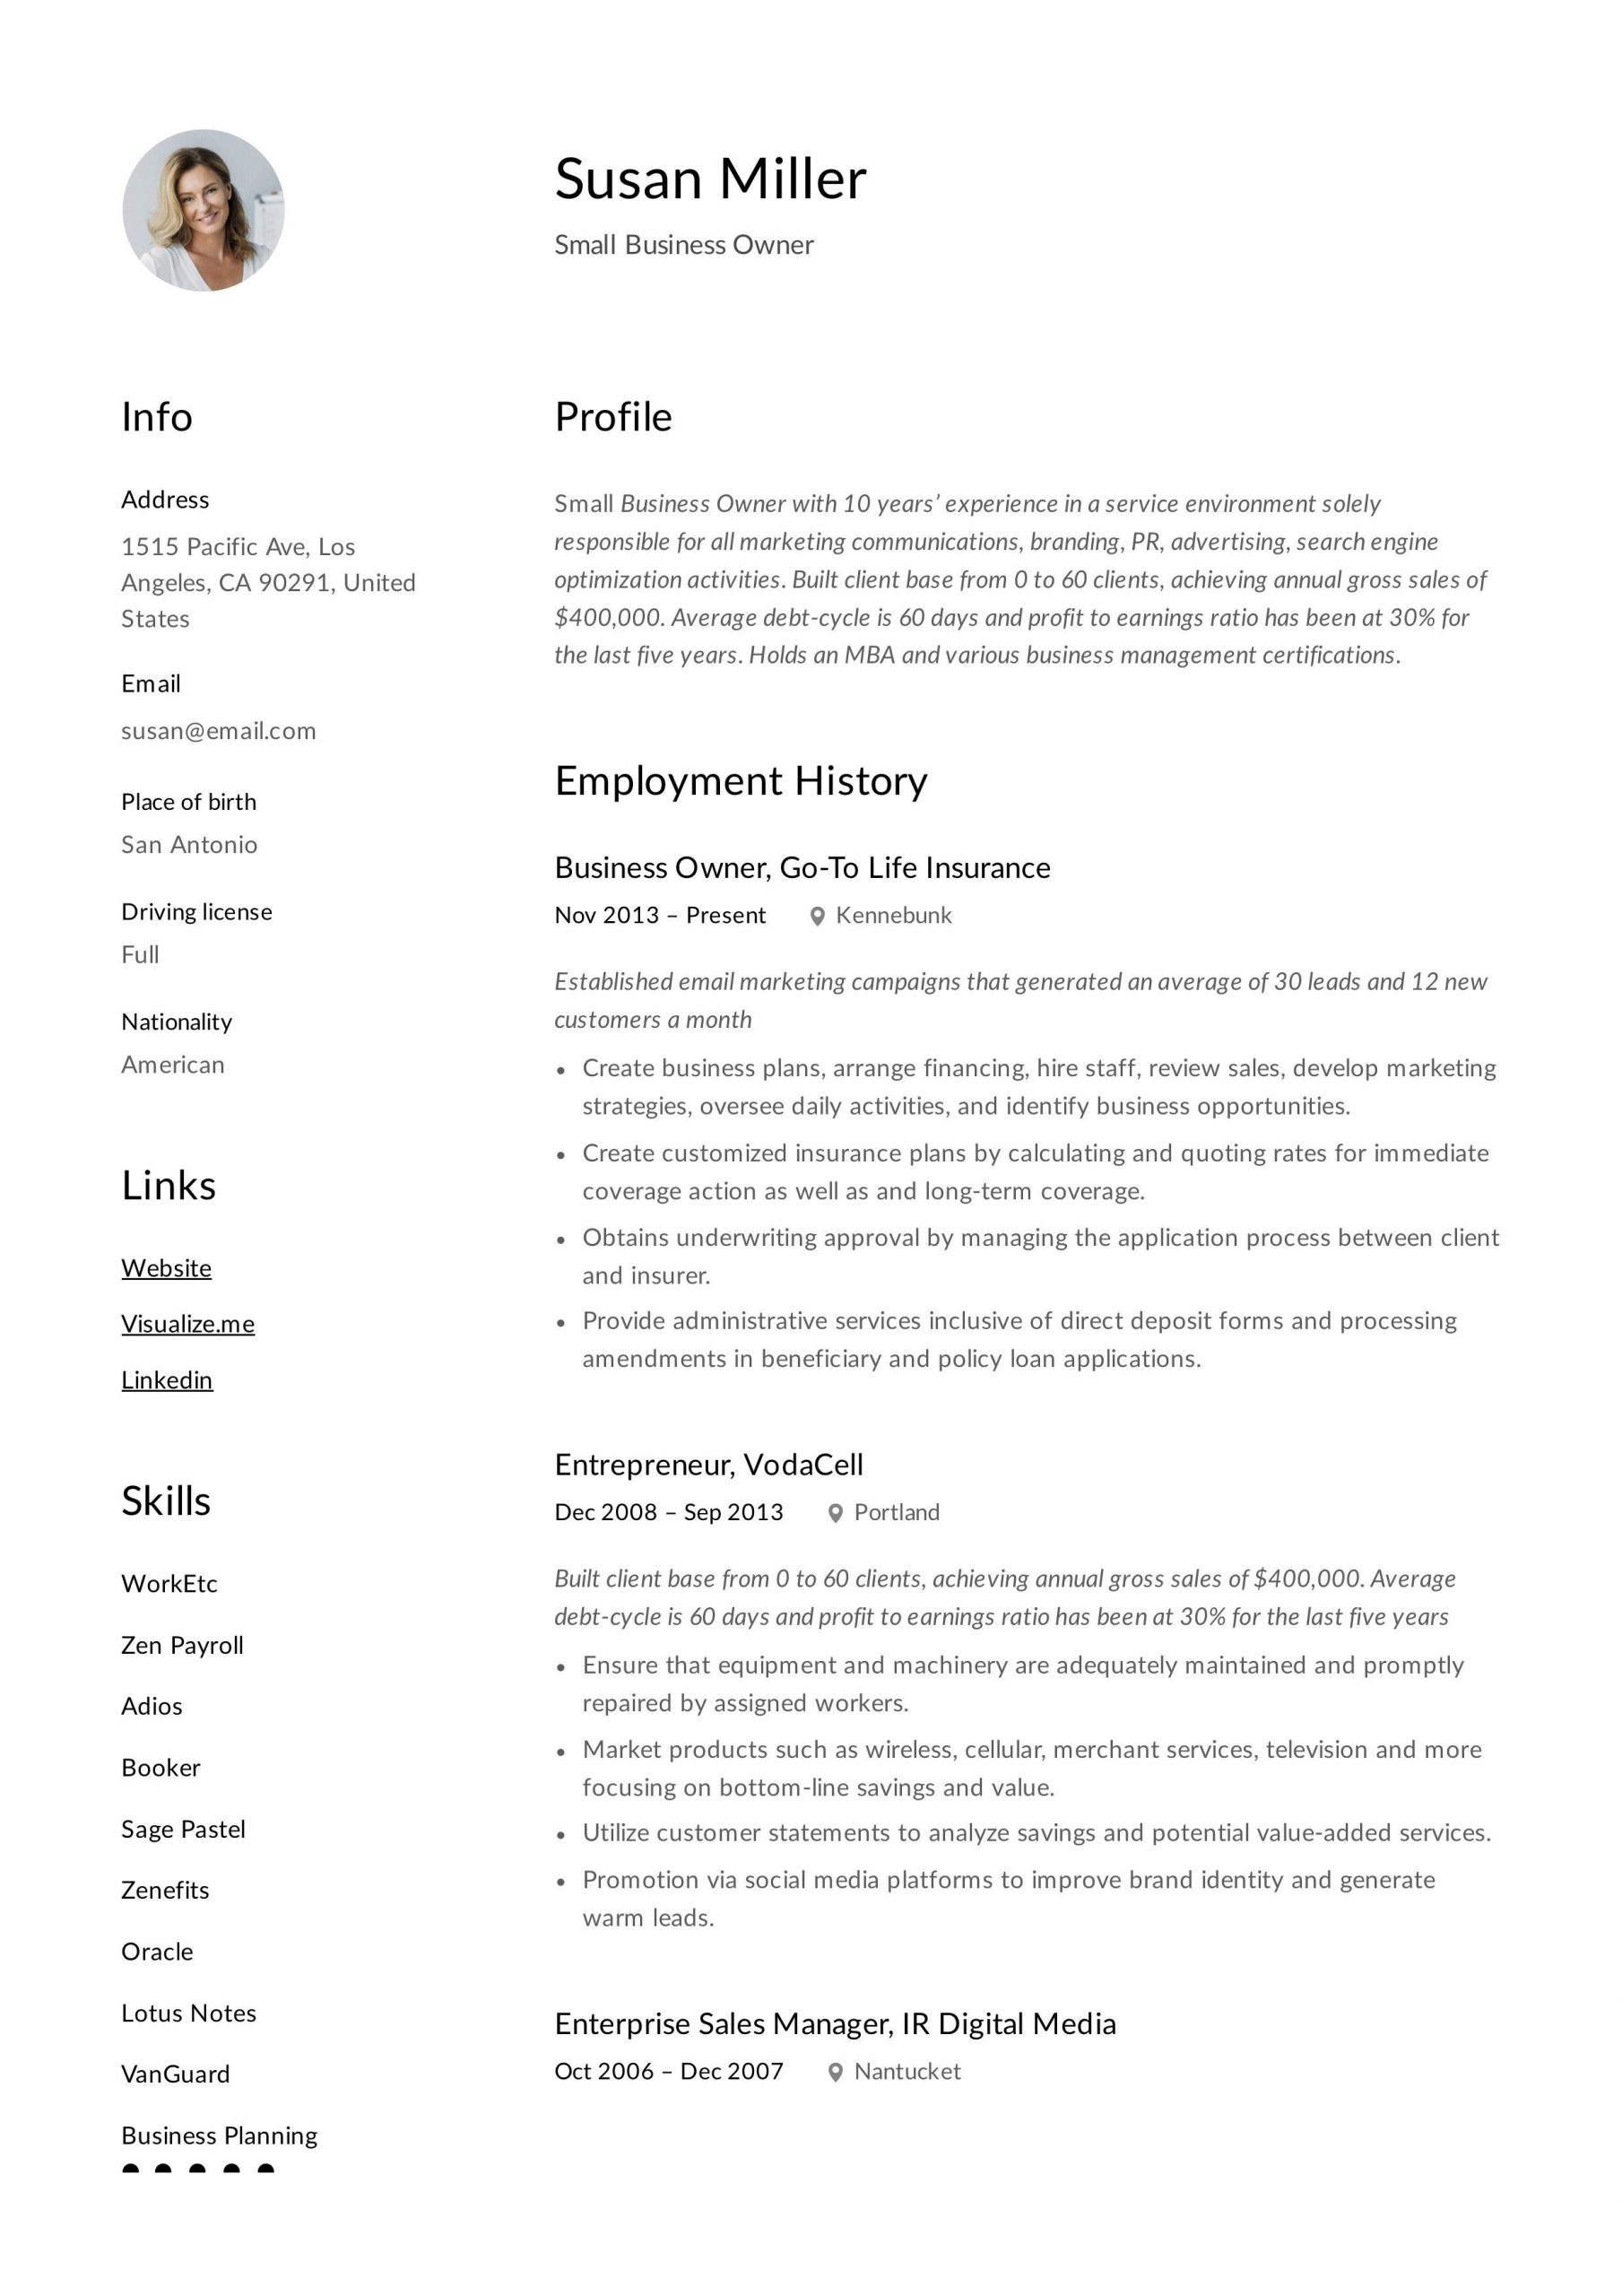 Resume Template for Small Business Owner Small Business Owner Resume Template Resume Guide, Resume …